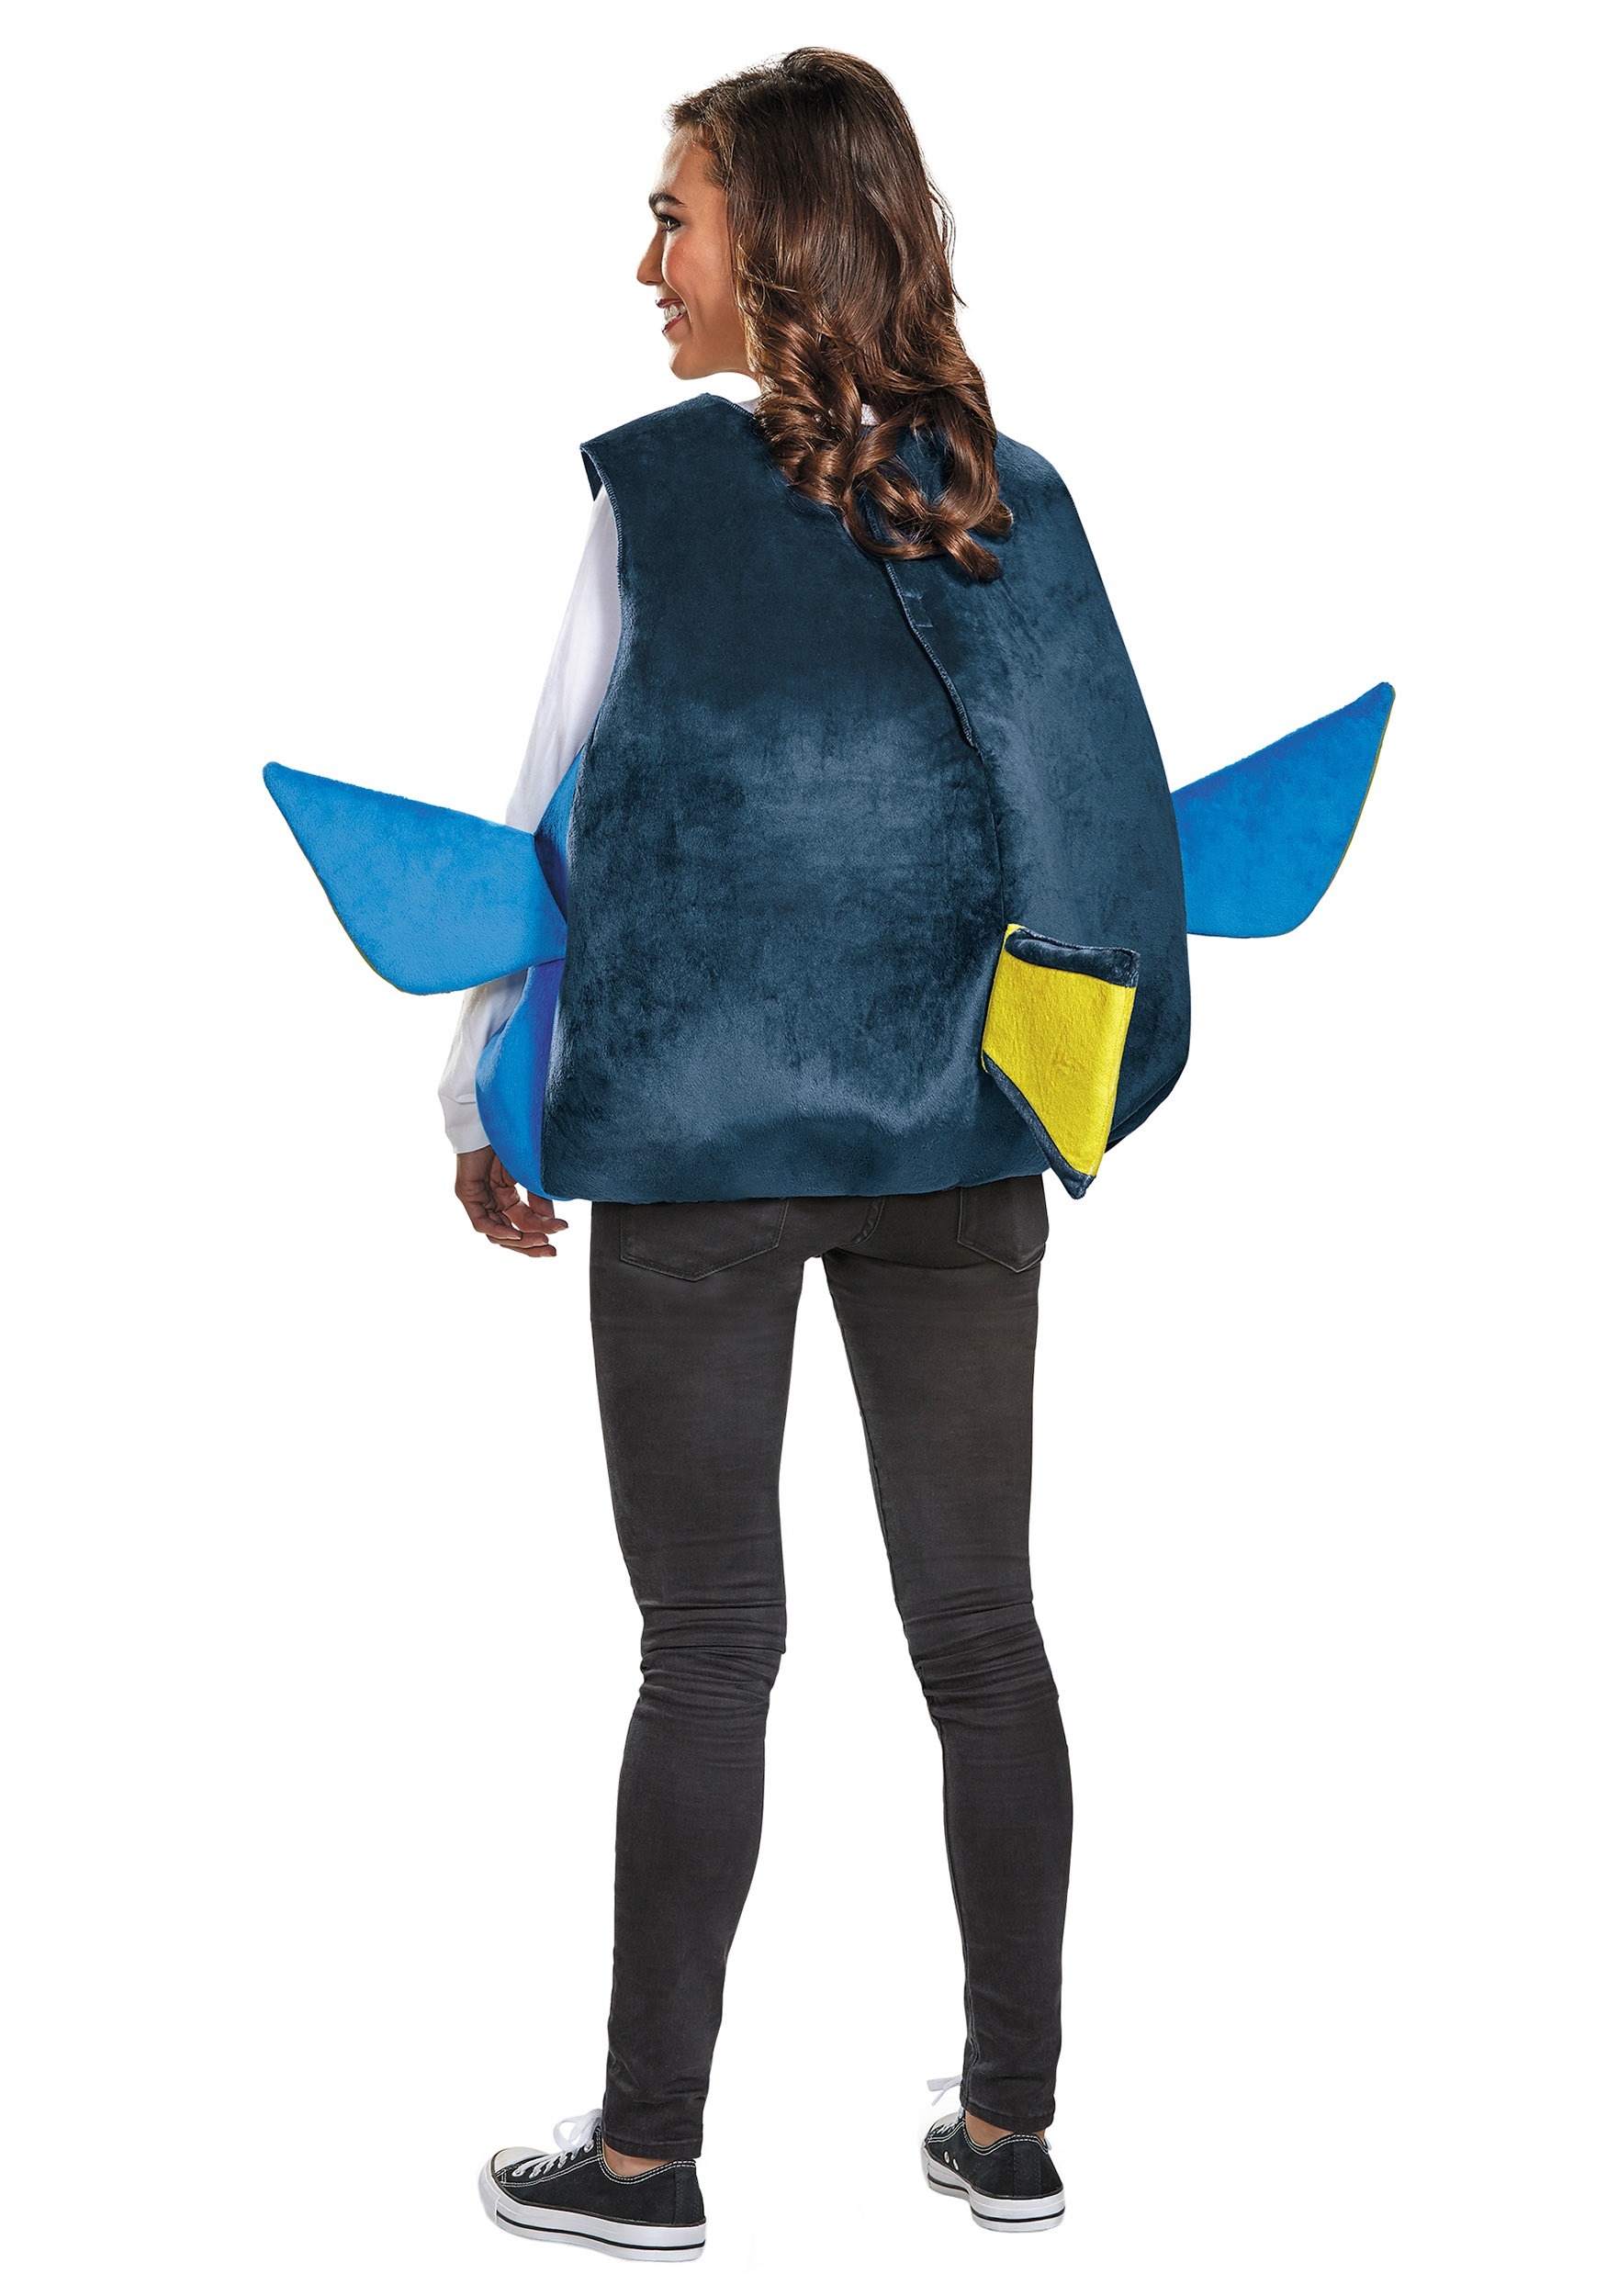 Dory Fish Costume from Finding Dory for Adults